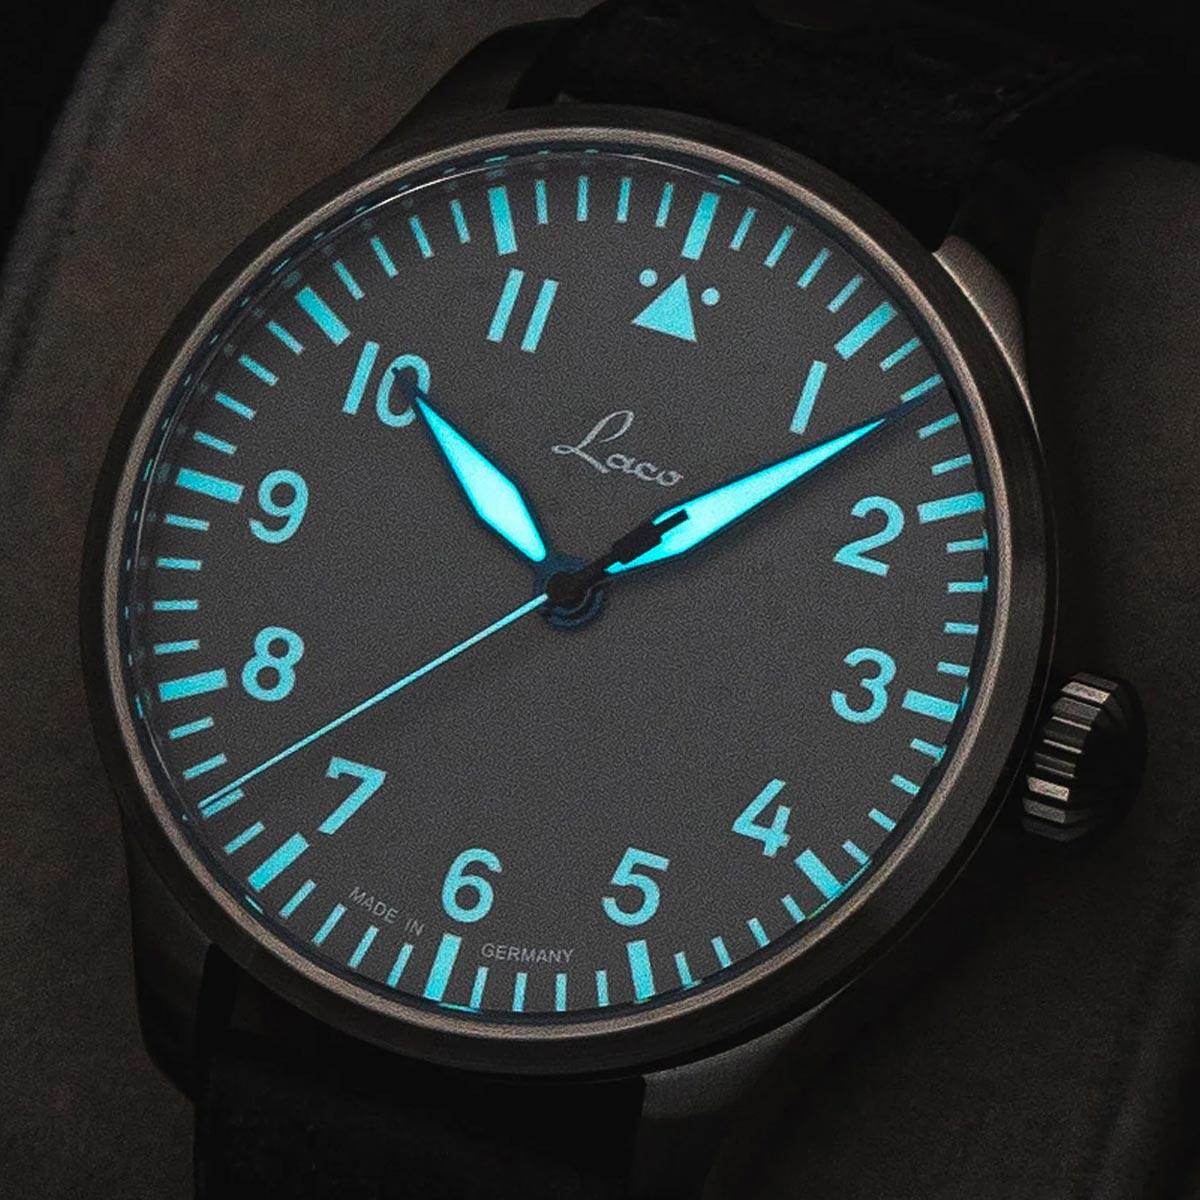 Admire the new Laco Augsburg Olive & Aachen At Red Army Watches